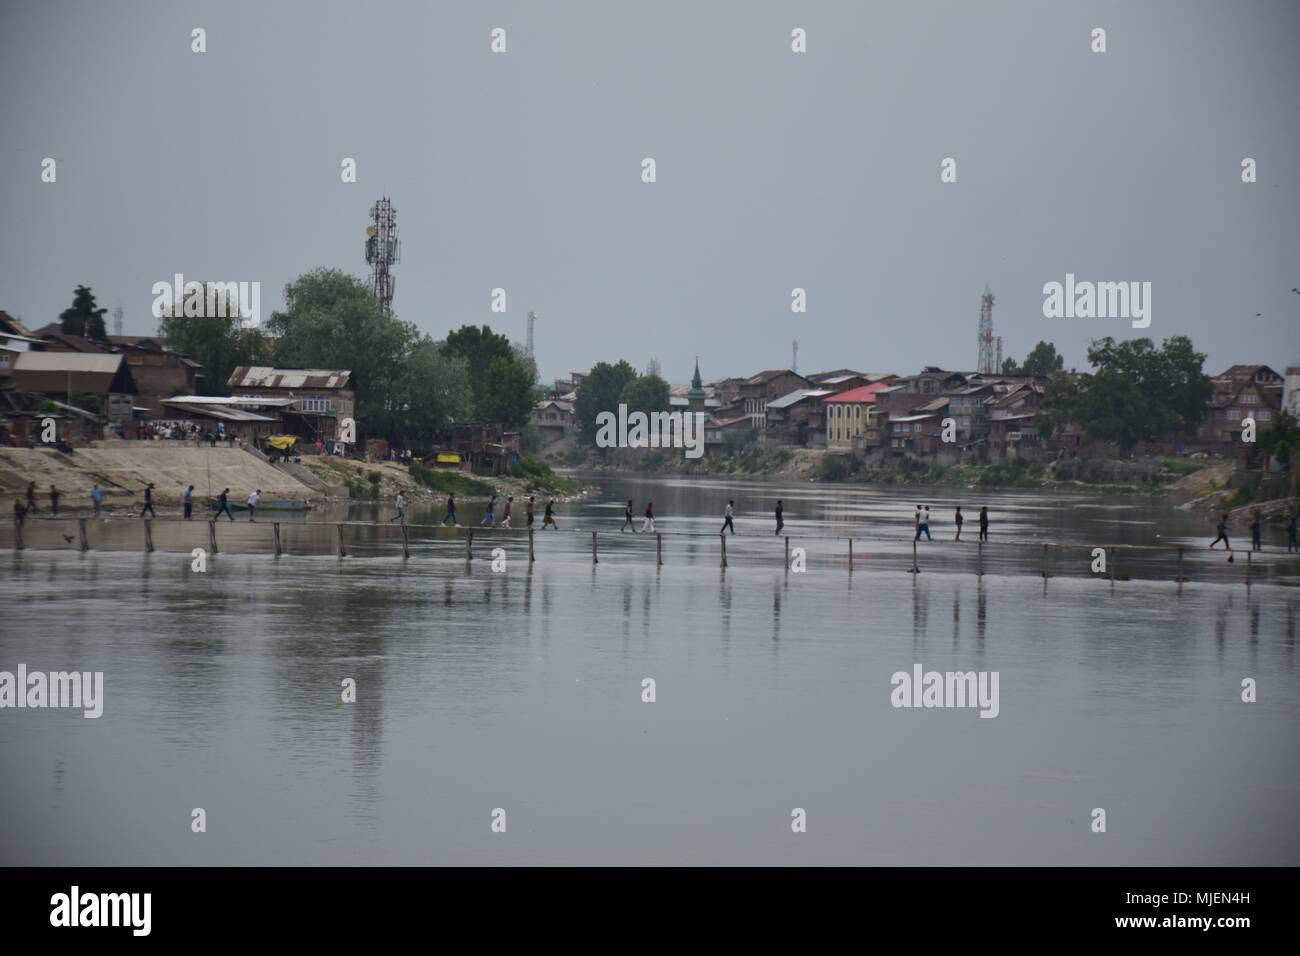 May 5, 2018 - Srinagar, Jammu & Kashmir, India - People walks over the wooden bridge to reach the Encounter site.4 Killed and several injured in an encounter between Indian forces and militants at chatabal area of Srinagar summer capital of Indian Kashmir on Saturday. Three militants were killed during a brief shootout after government forces laid seige around densely populated chatabal area of Srinagar. A young man also died after he was hit by the armoured vehicle during the clashes between the residents and police force as residents tried to help the Militants in escape. (Credit Image: © A Stock Photo